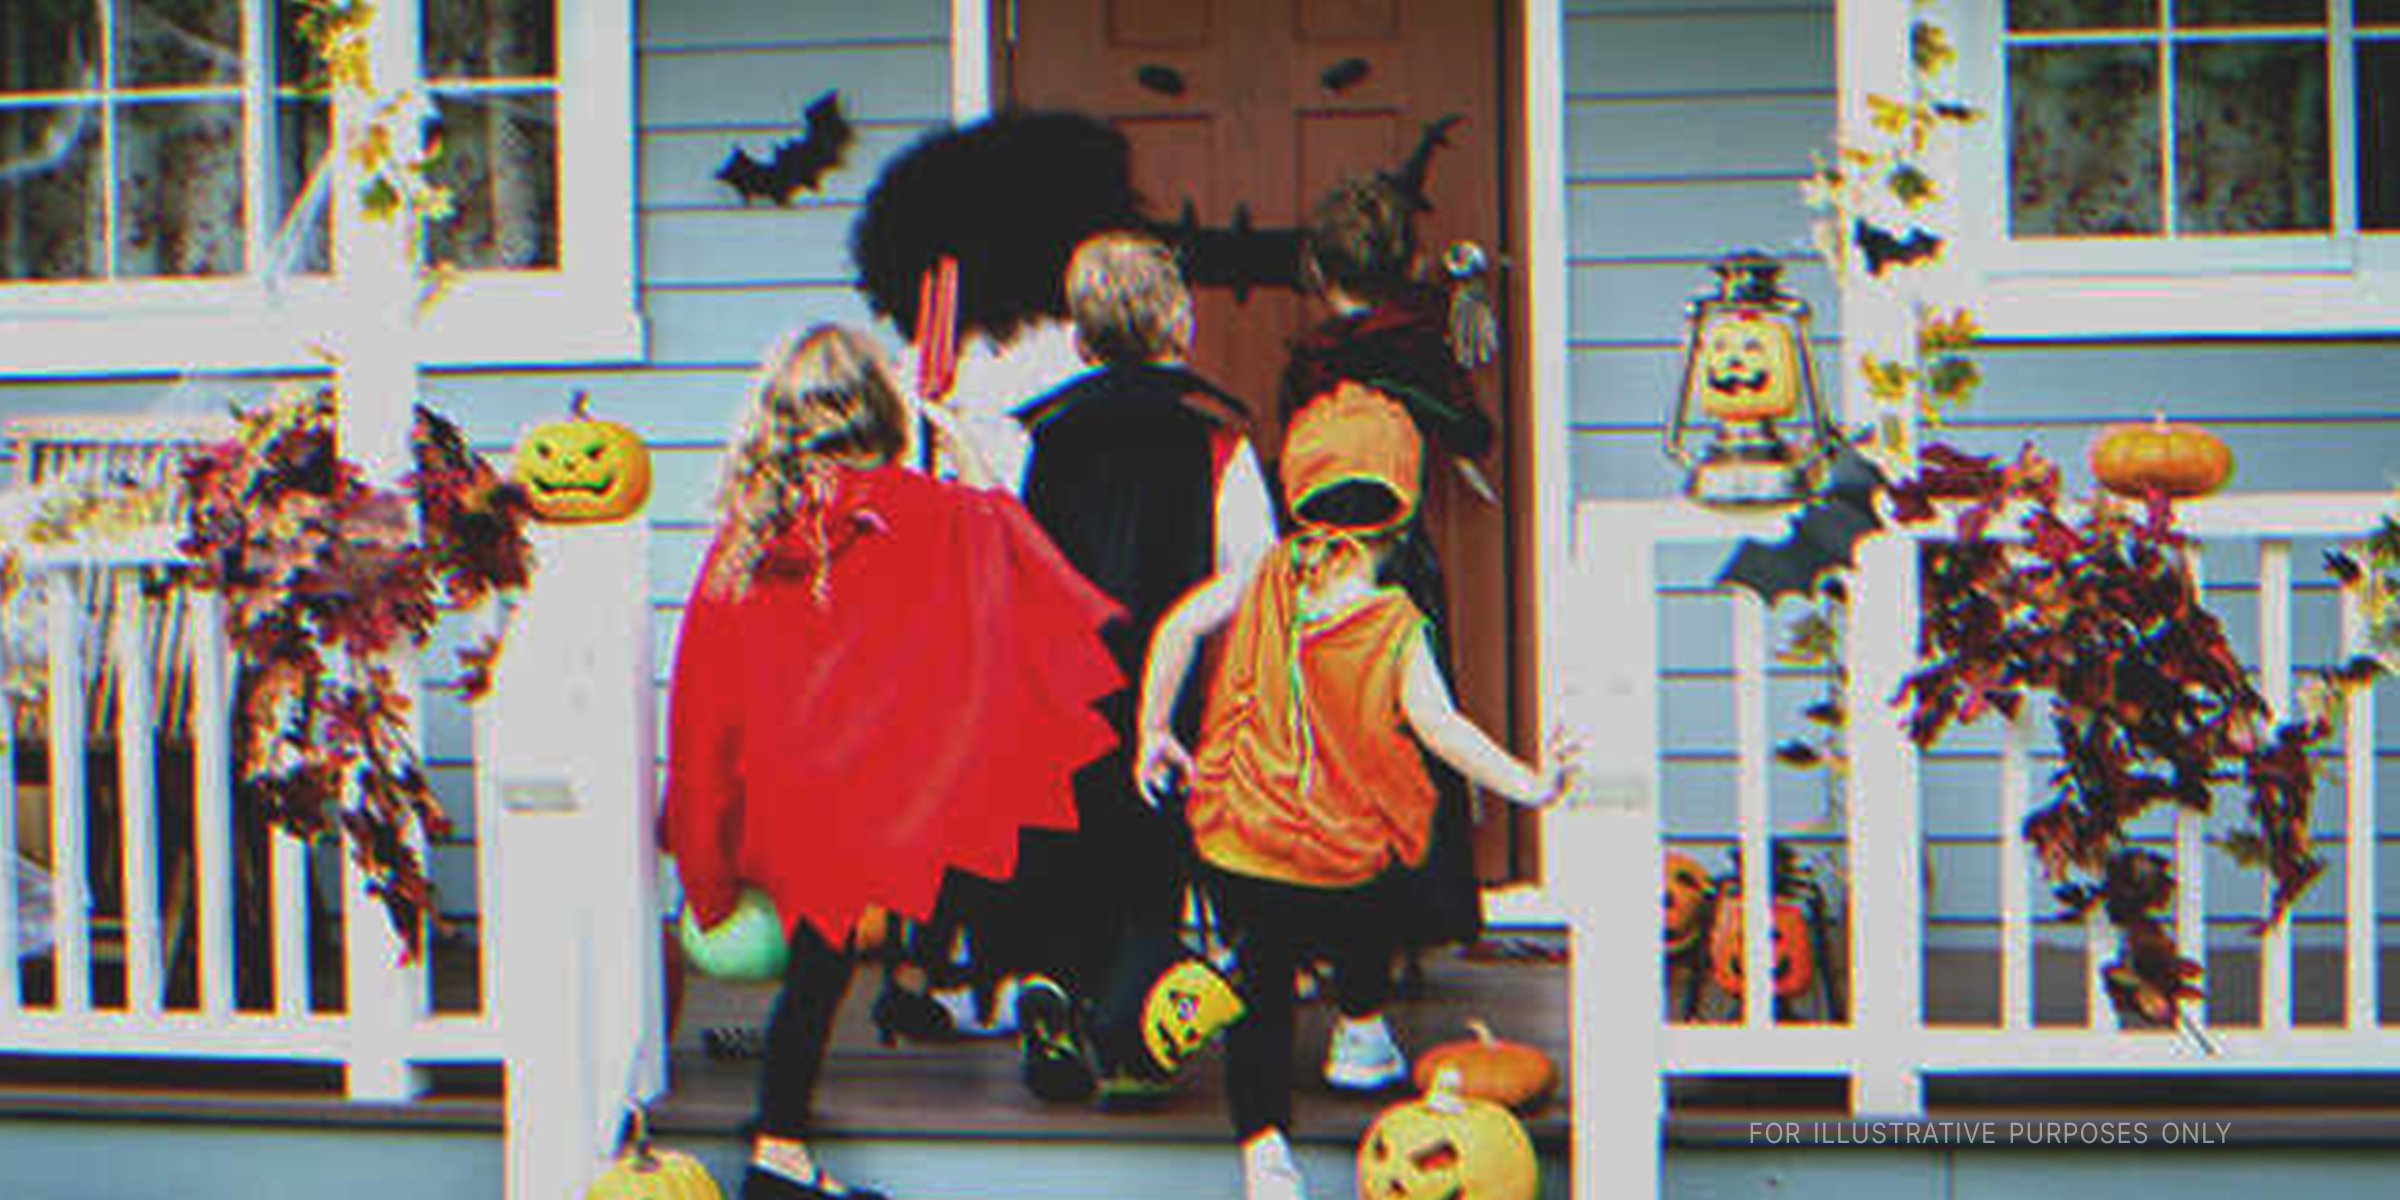 Kids trick-or-treating on Halloween | Source: Shutterstock